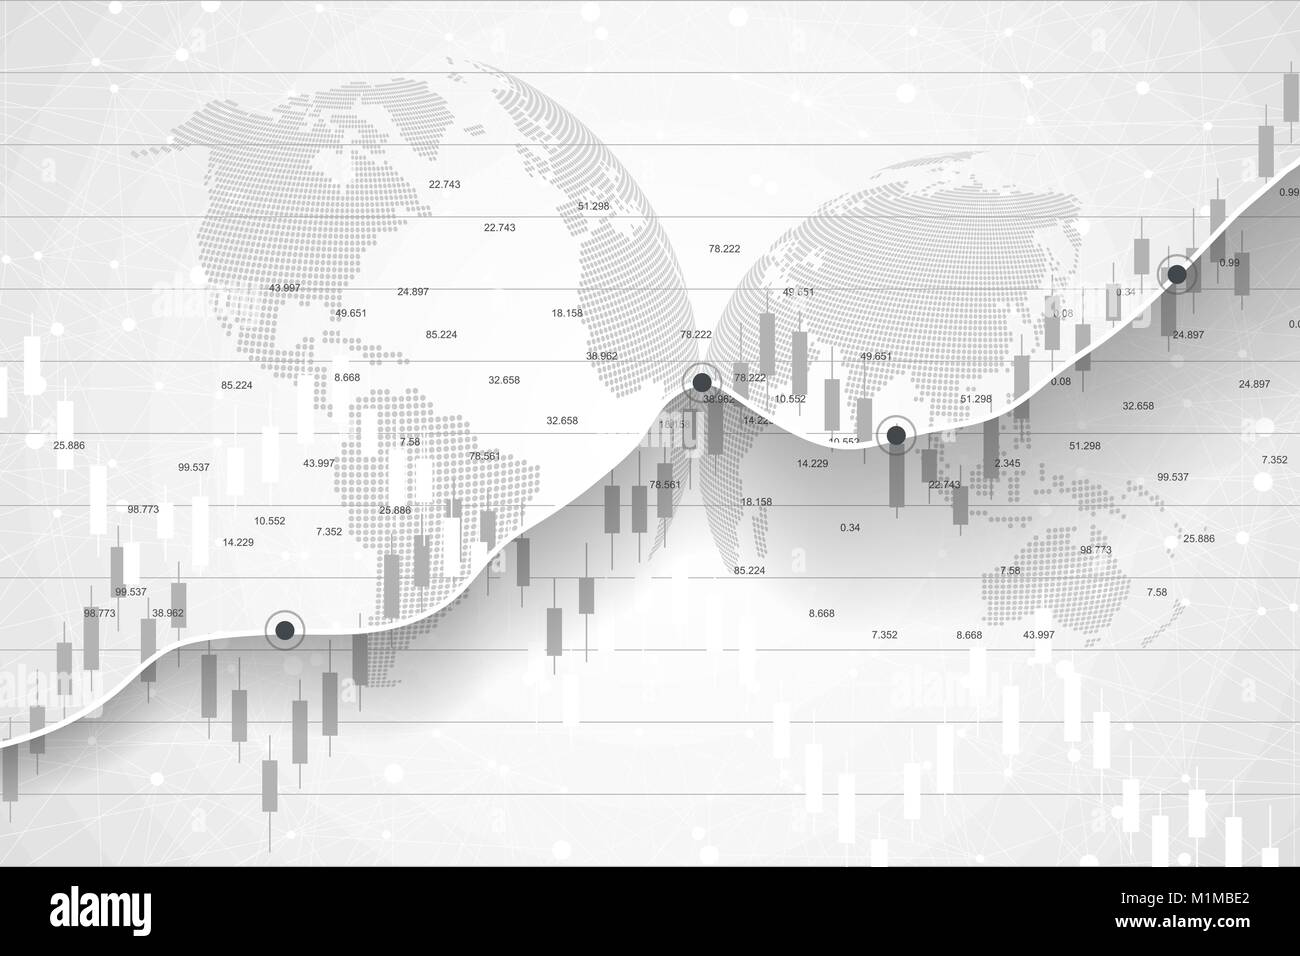 Stock market and exchange. Candle stick graph chart of stock market investment trading. Stock market data. Bullish point, Trend of graph. Vector illustration. Stock Vector